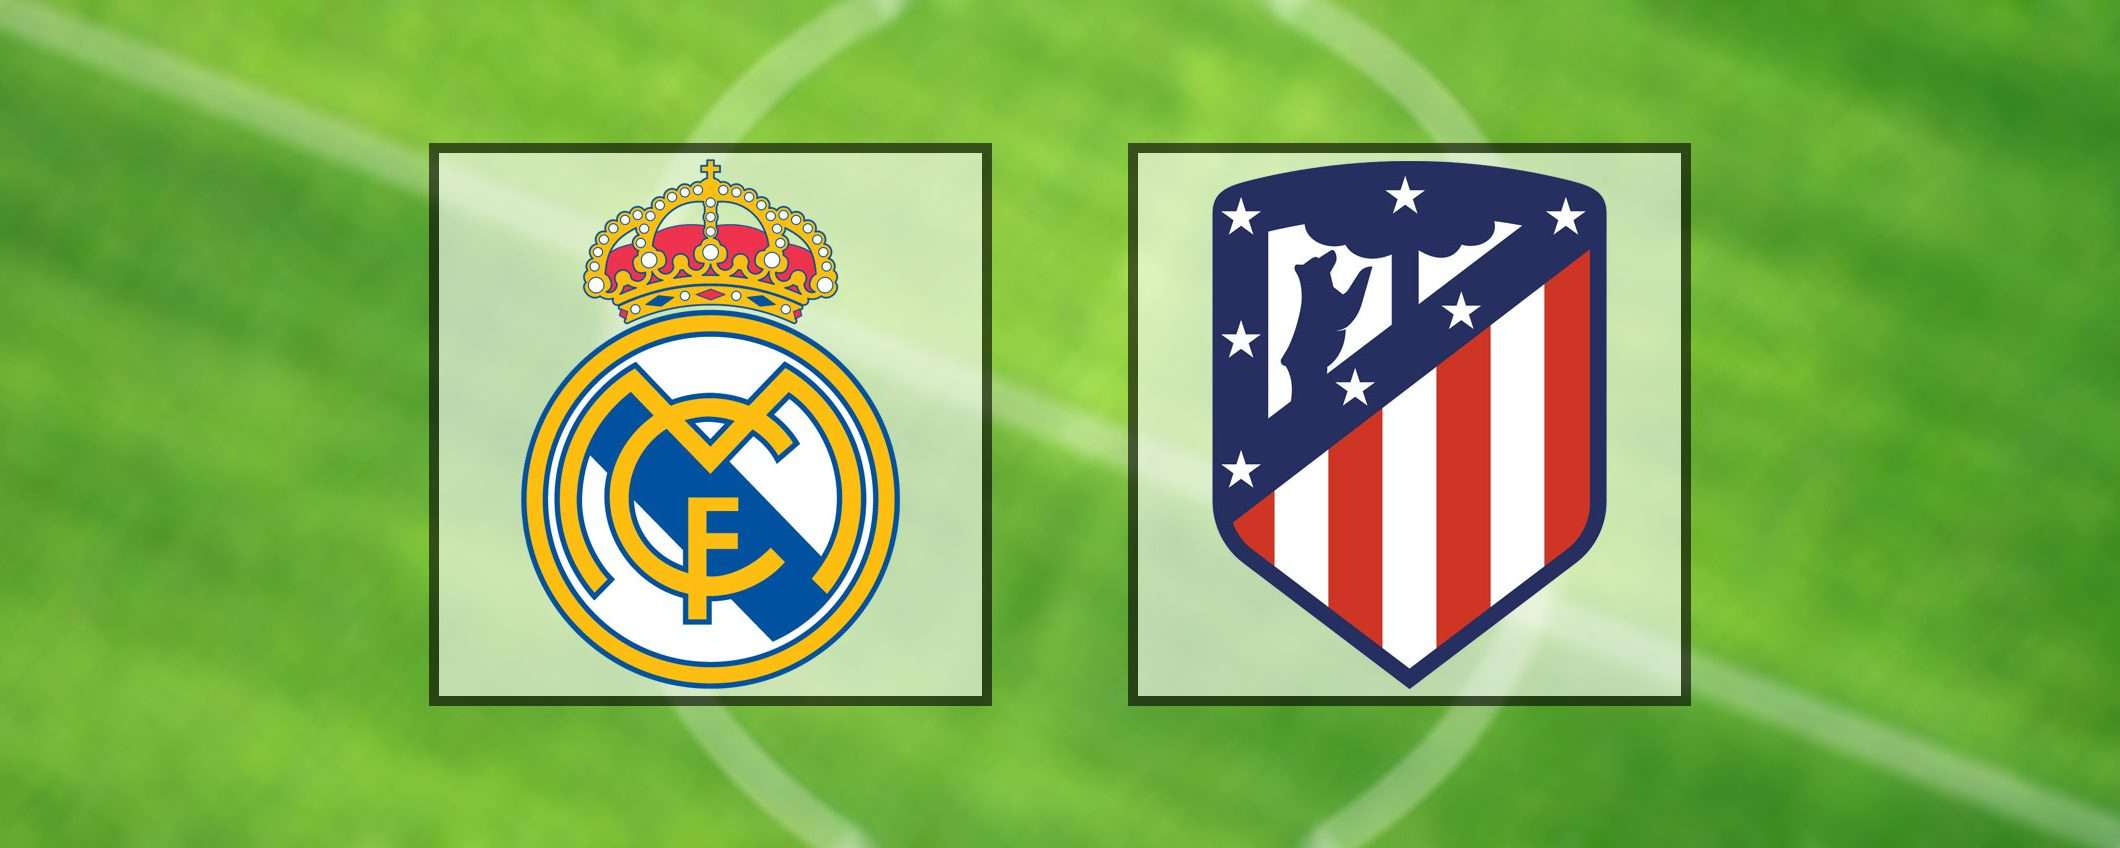 Come vedere Real Madrid-Atletico Madrid in streaming